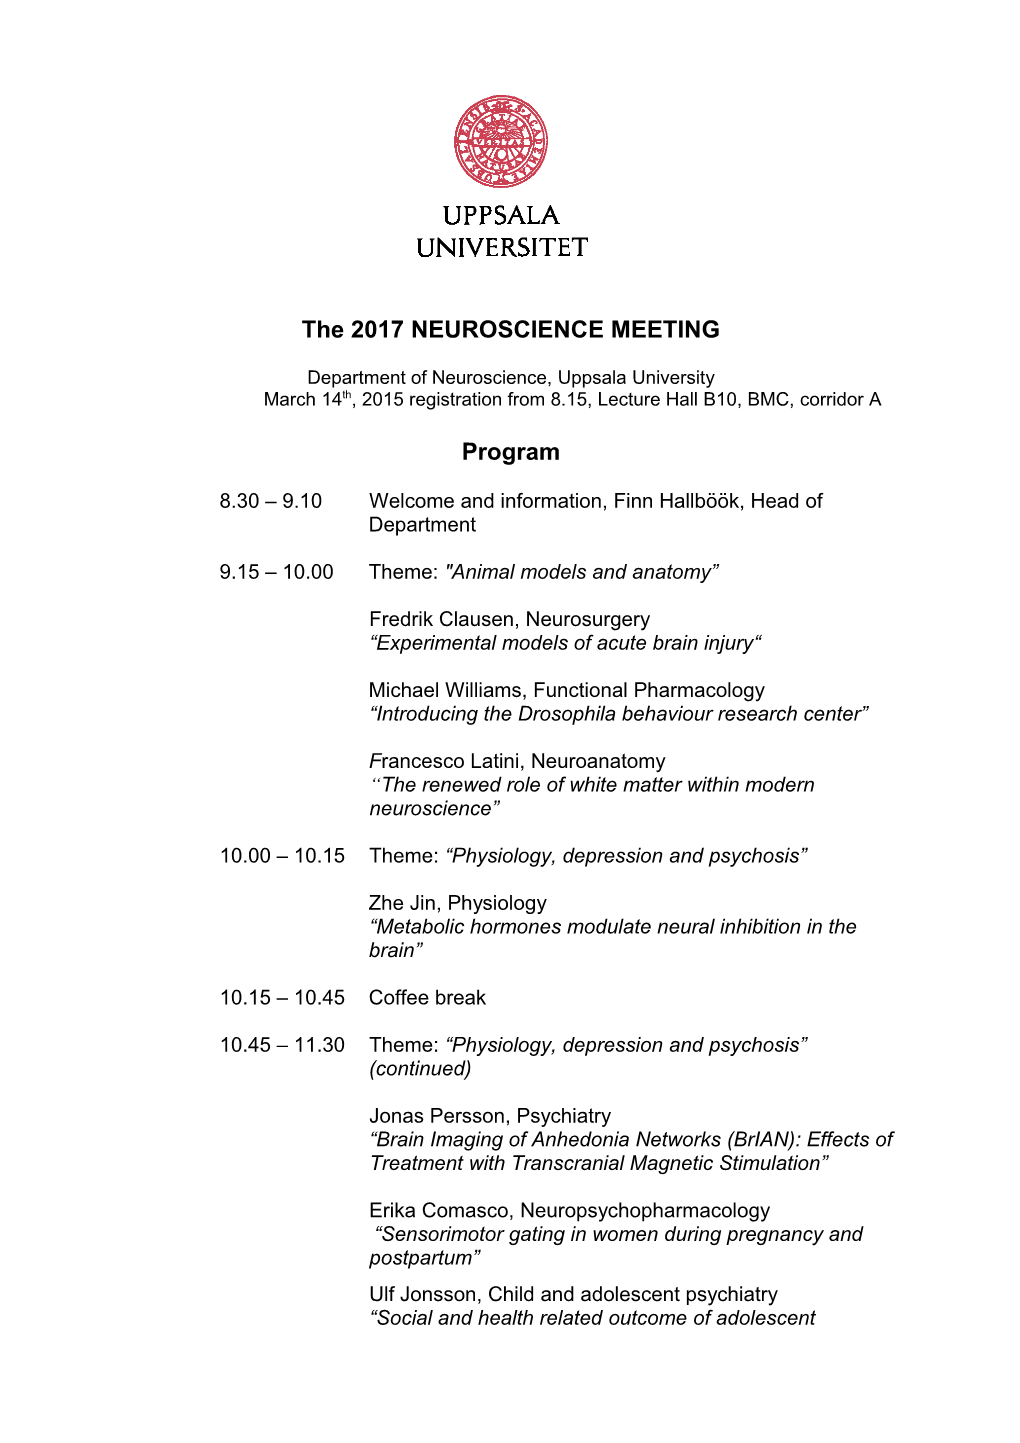 The 2004 NEUROSCIENCE MEETING at the Department of Neuroscience